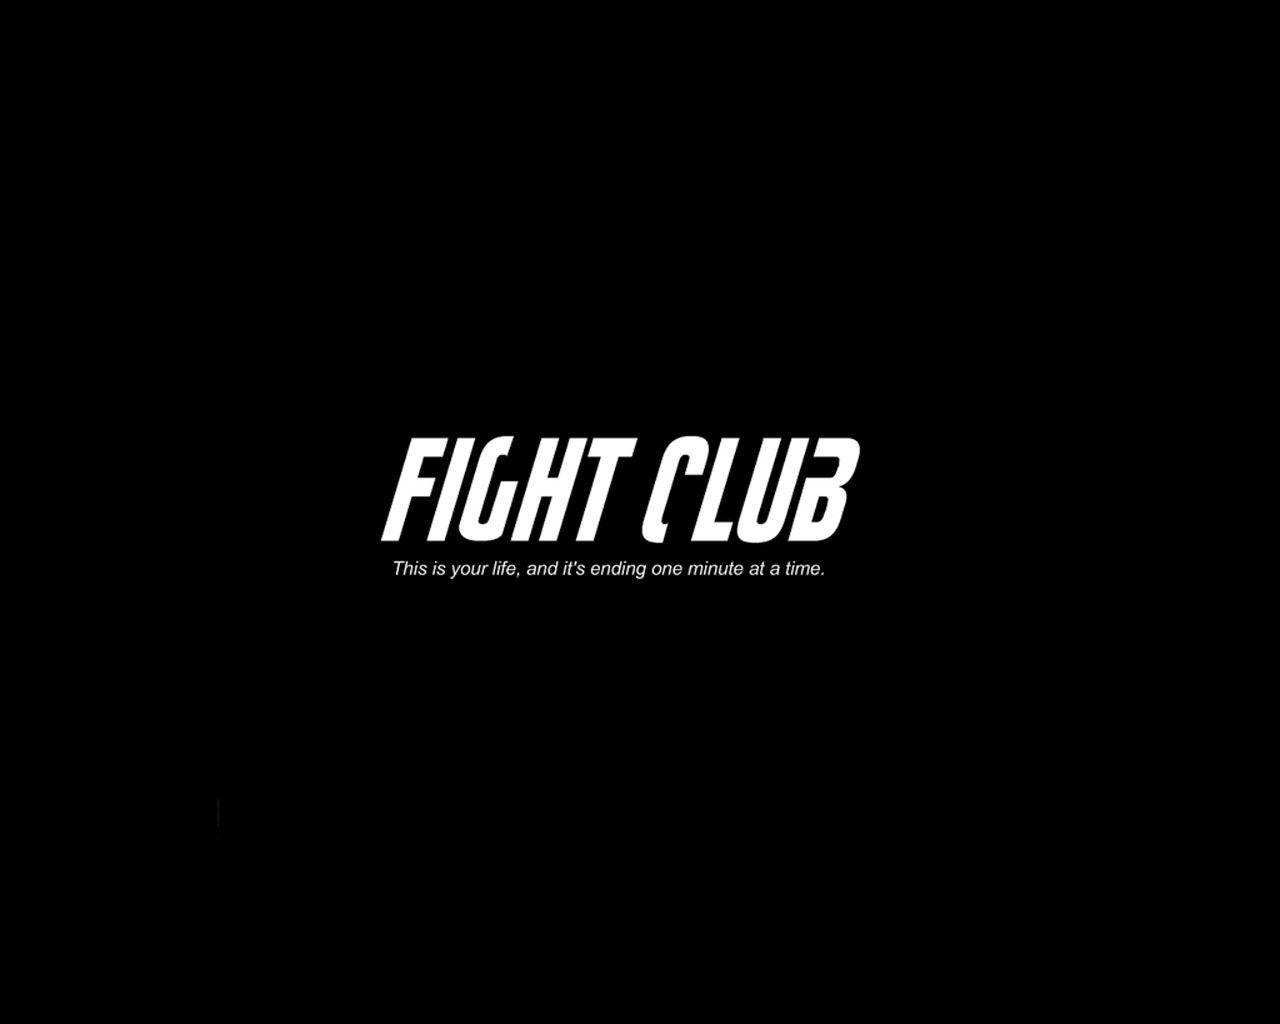 Fight Club Wallpapers Quote - Wallpaper Cave